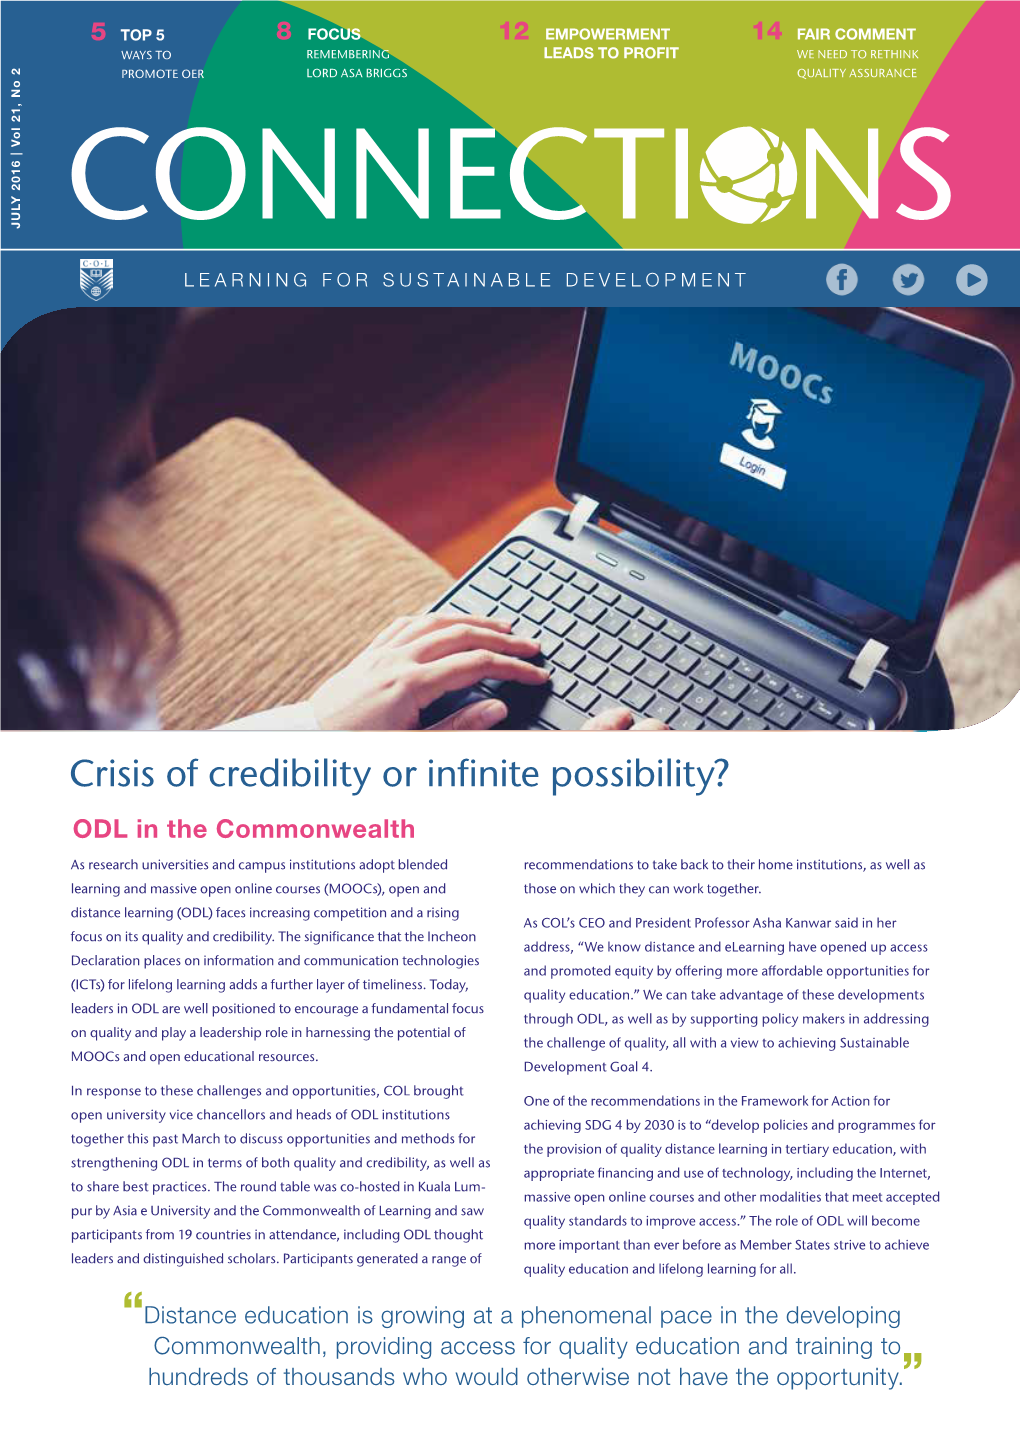 Crisis of Credibility Or Infinite Possibility? ODL in the Commonwealth